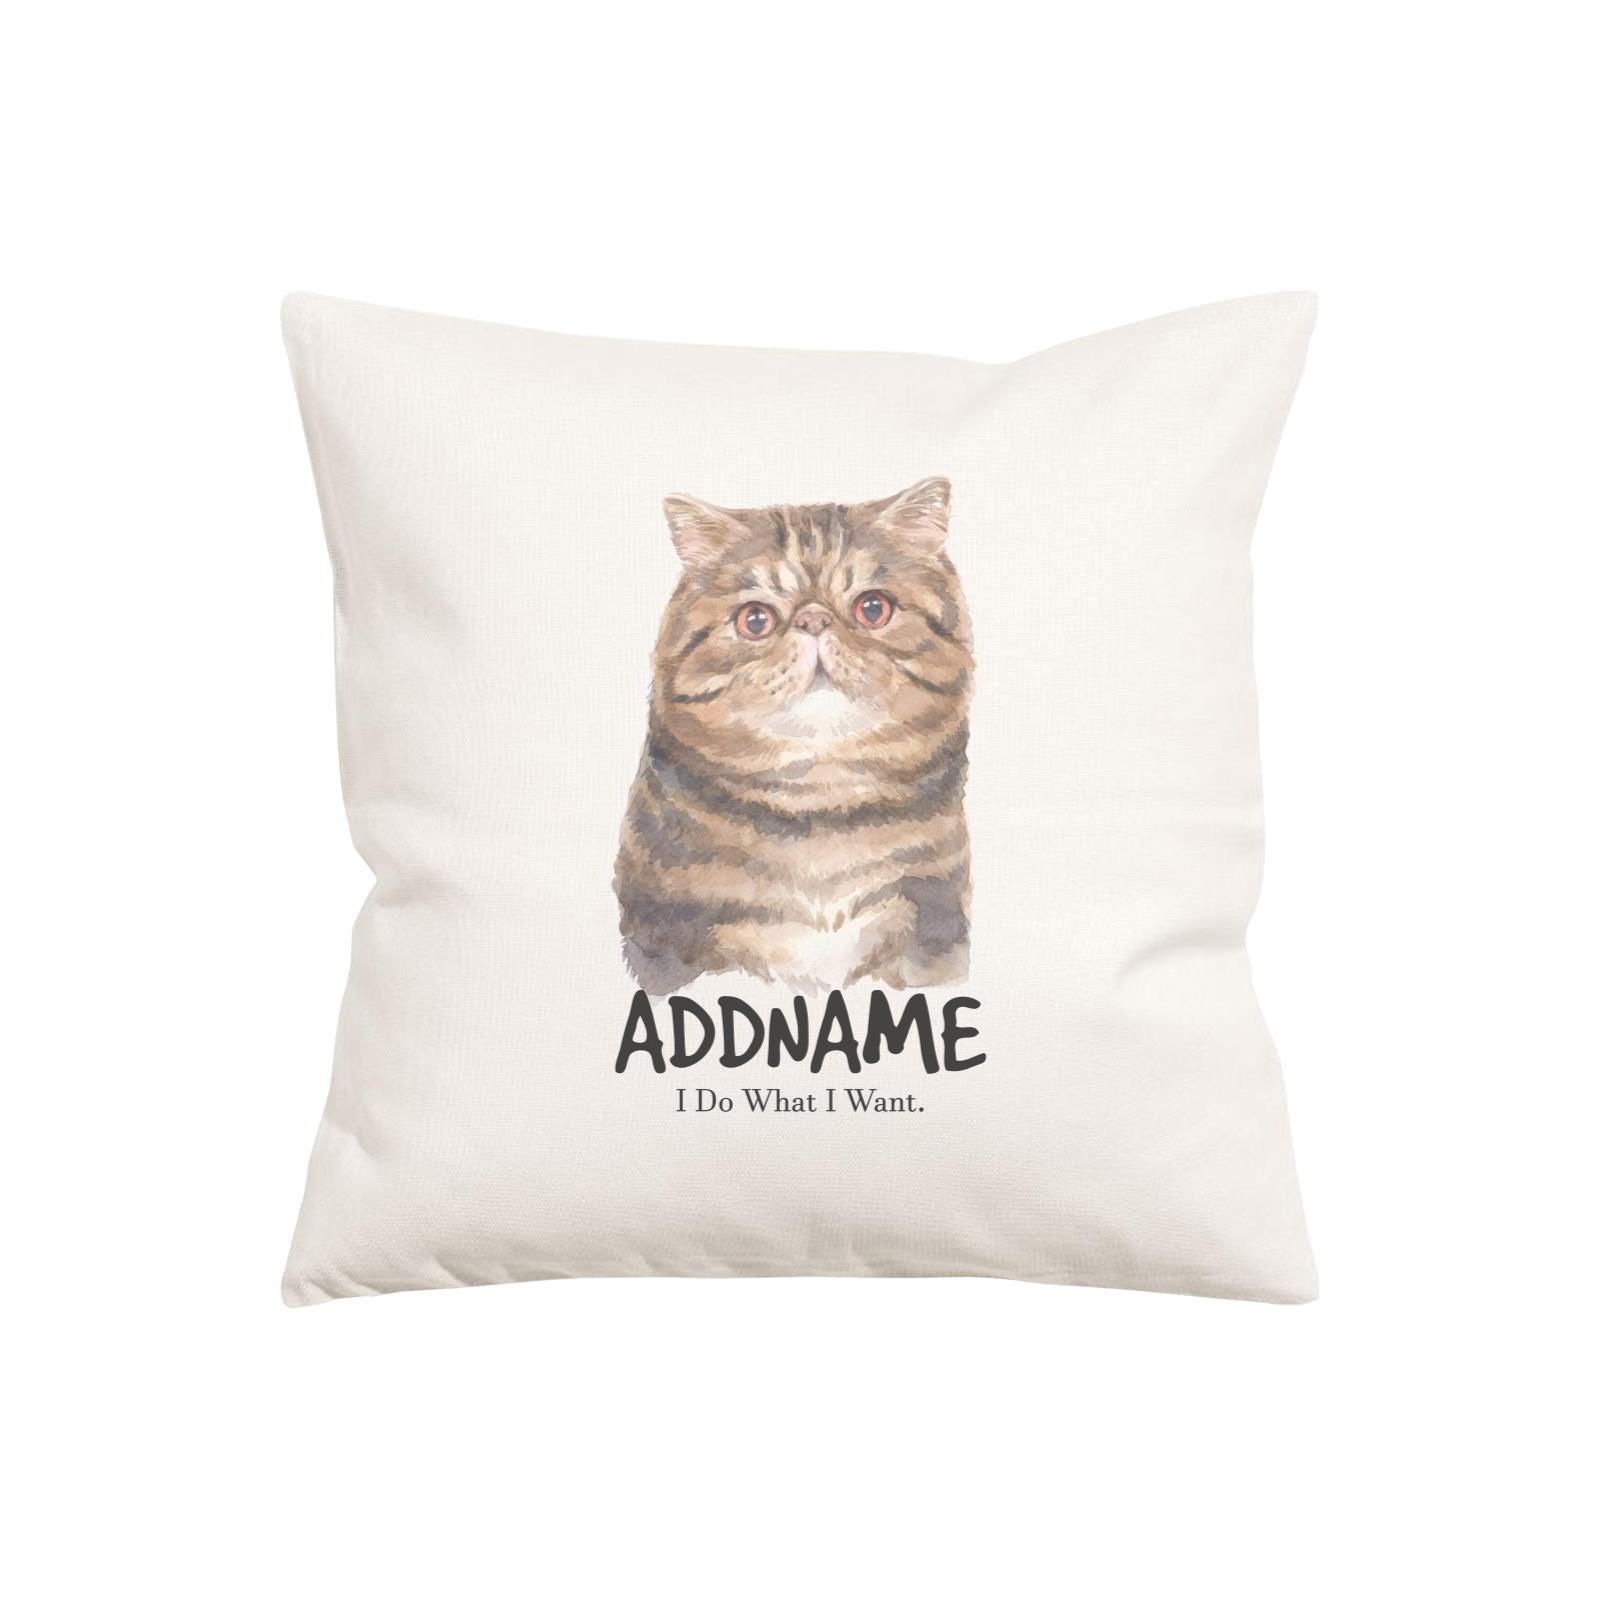 Watercolor Cat Series Exotic Shorthair Cat I Do What I Want Addname Pillow Cushion